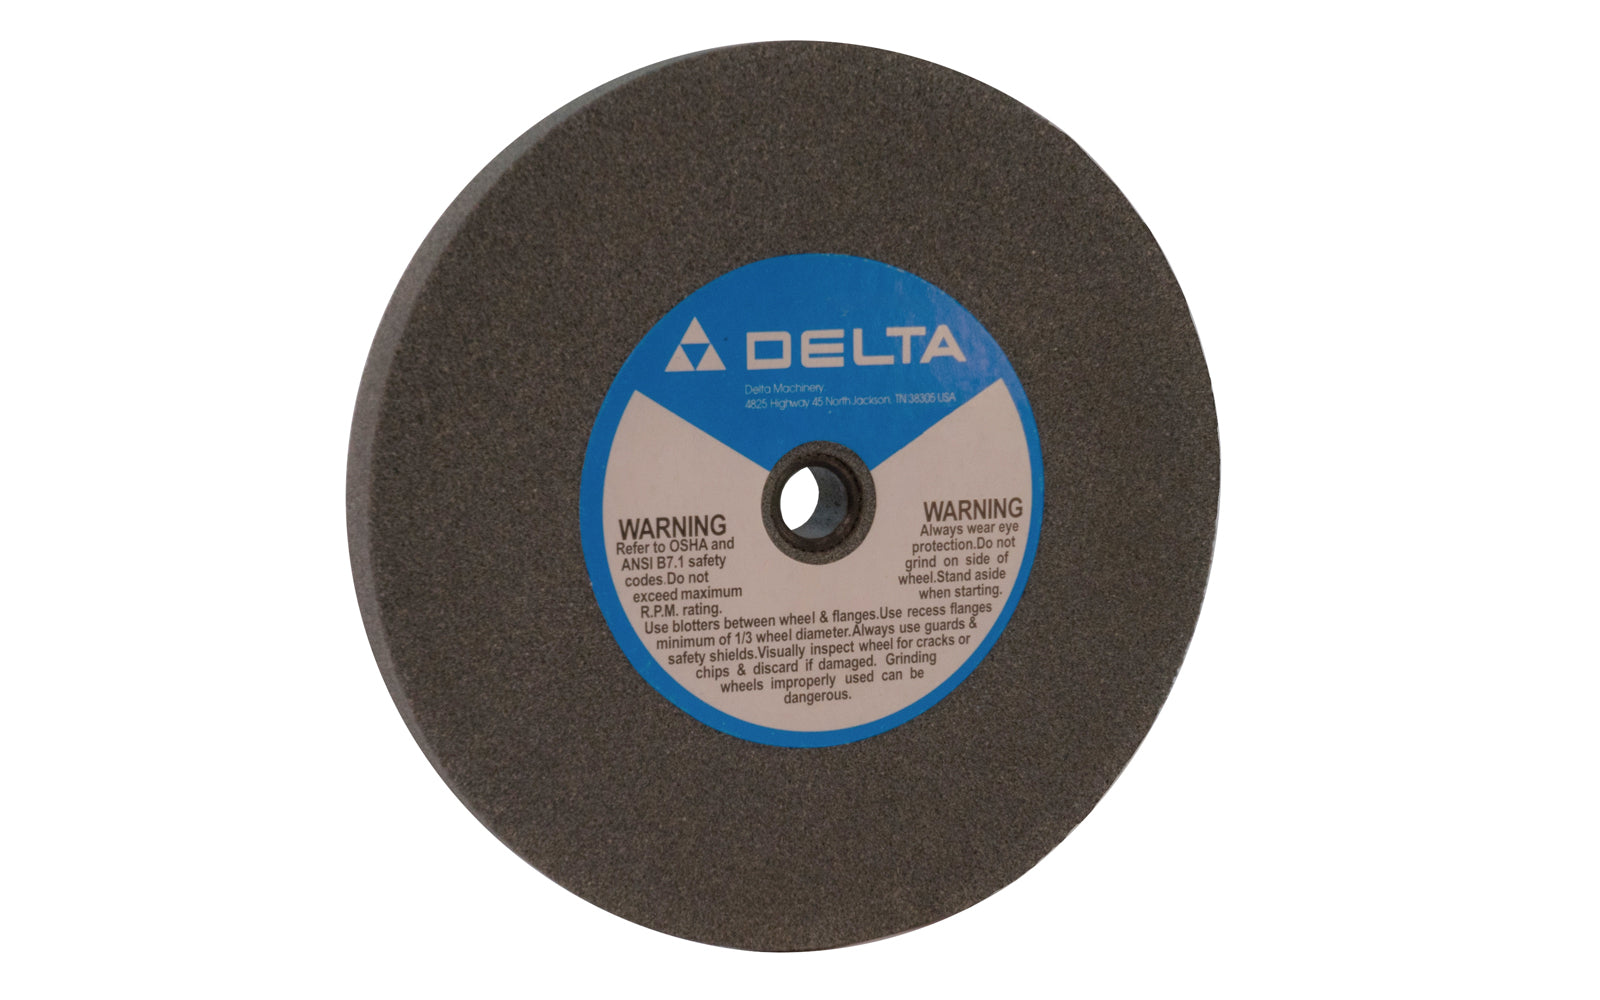 8" Aluminum Oxide Bench Grinding Wheel made by Delta. Designed for general purpose grinding on steel, high speed steels, & ferrous metals. Used for sharpening edges on tools.  8" diameter of wheel. 3/4" thickness. 60 grit. 